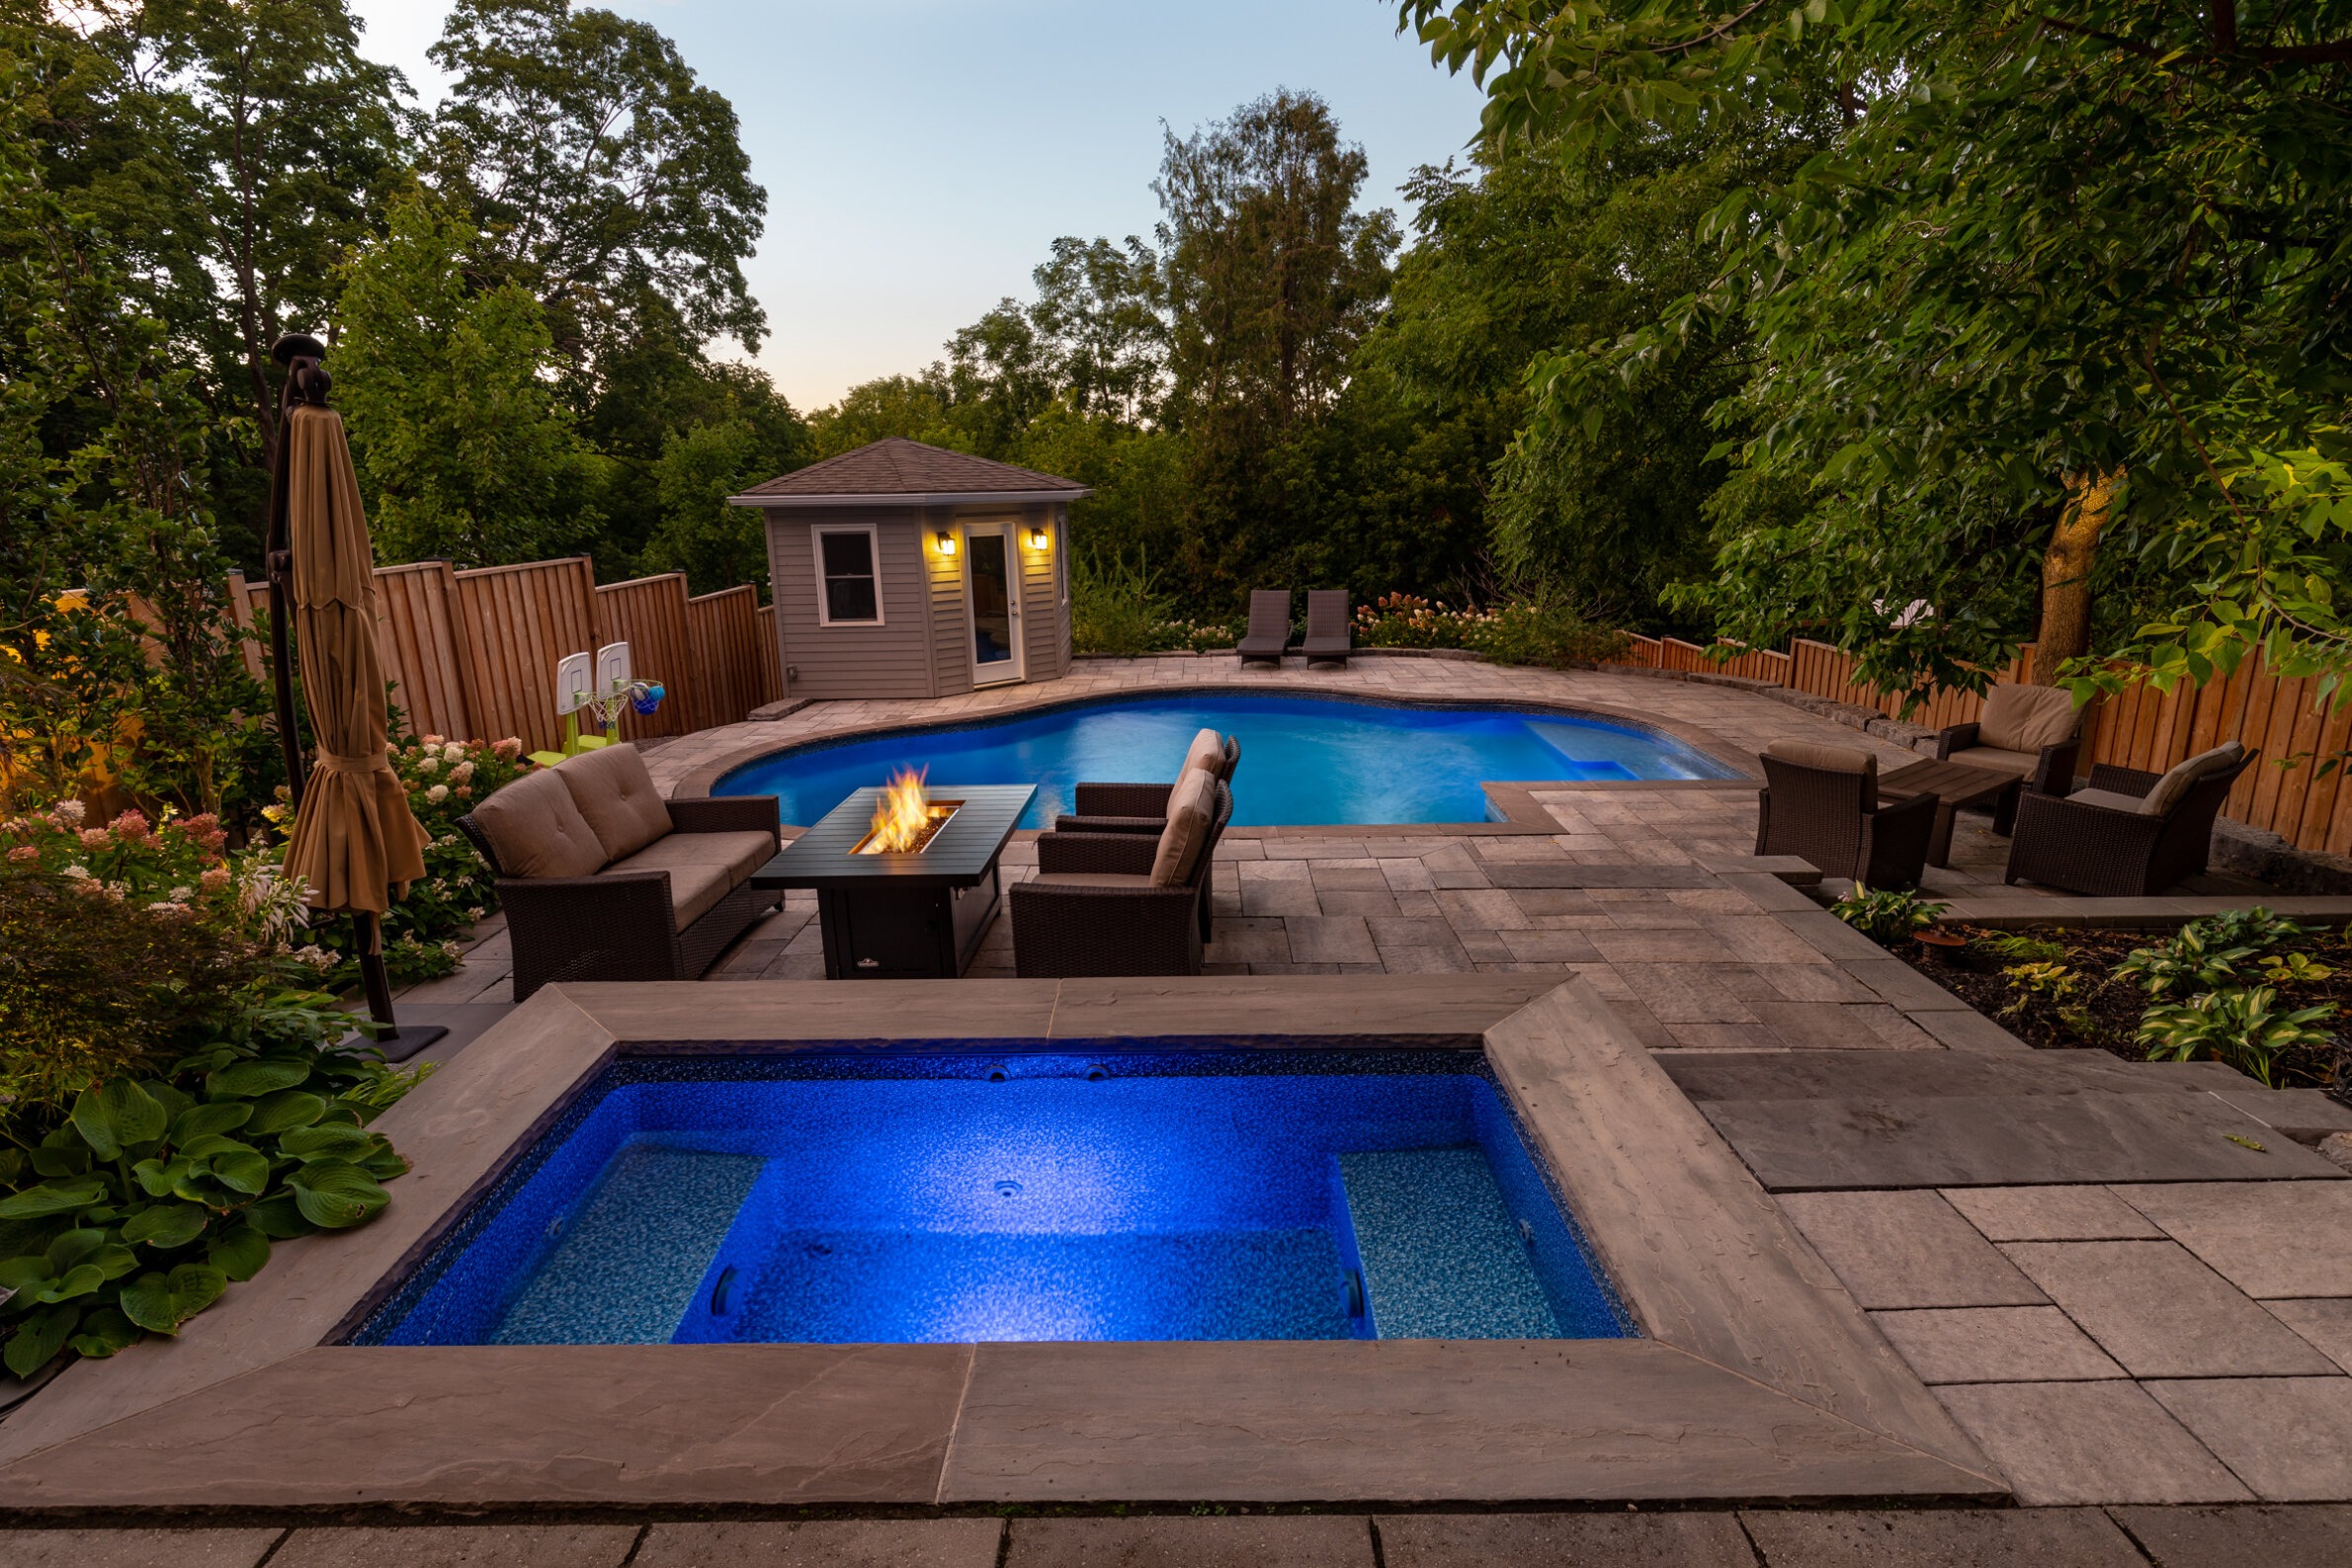 A tranquil backyard with a swimming pool, spa, outdoor furniture, gas firepit, neatly landscaped plants, wooden fence, and a small pool house at dusk.